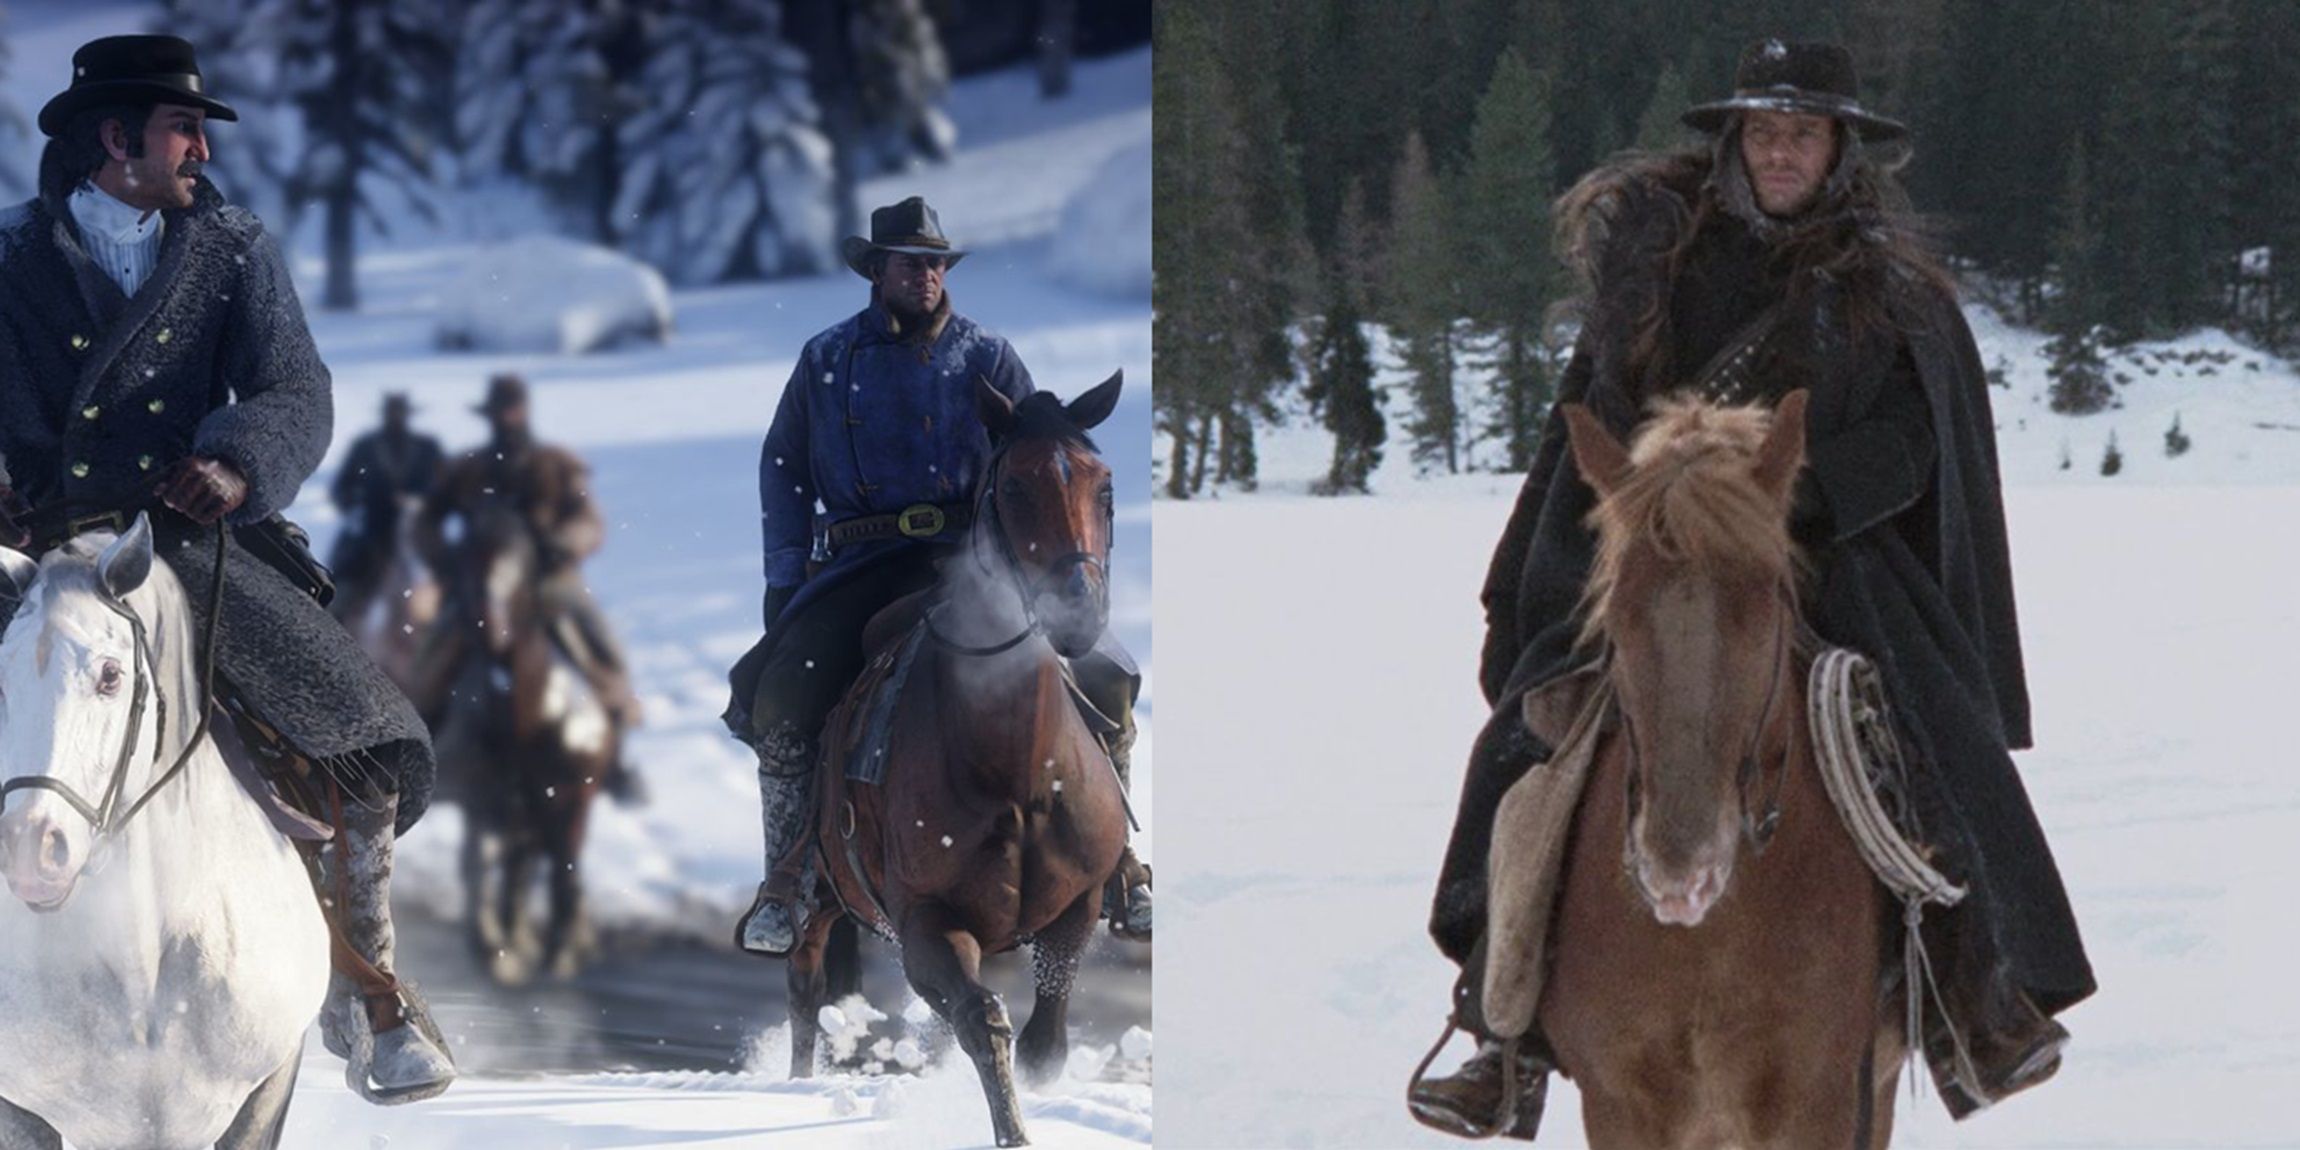 Men on horseback riding through the snow in Red Dead Redemption 2 and The Great Silence